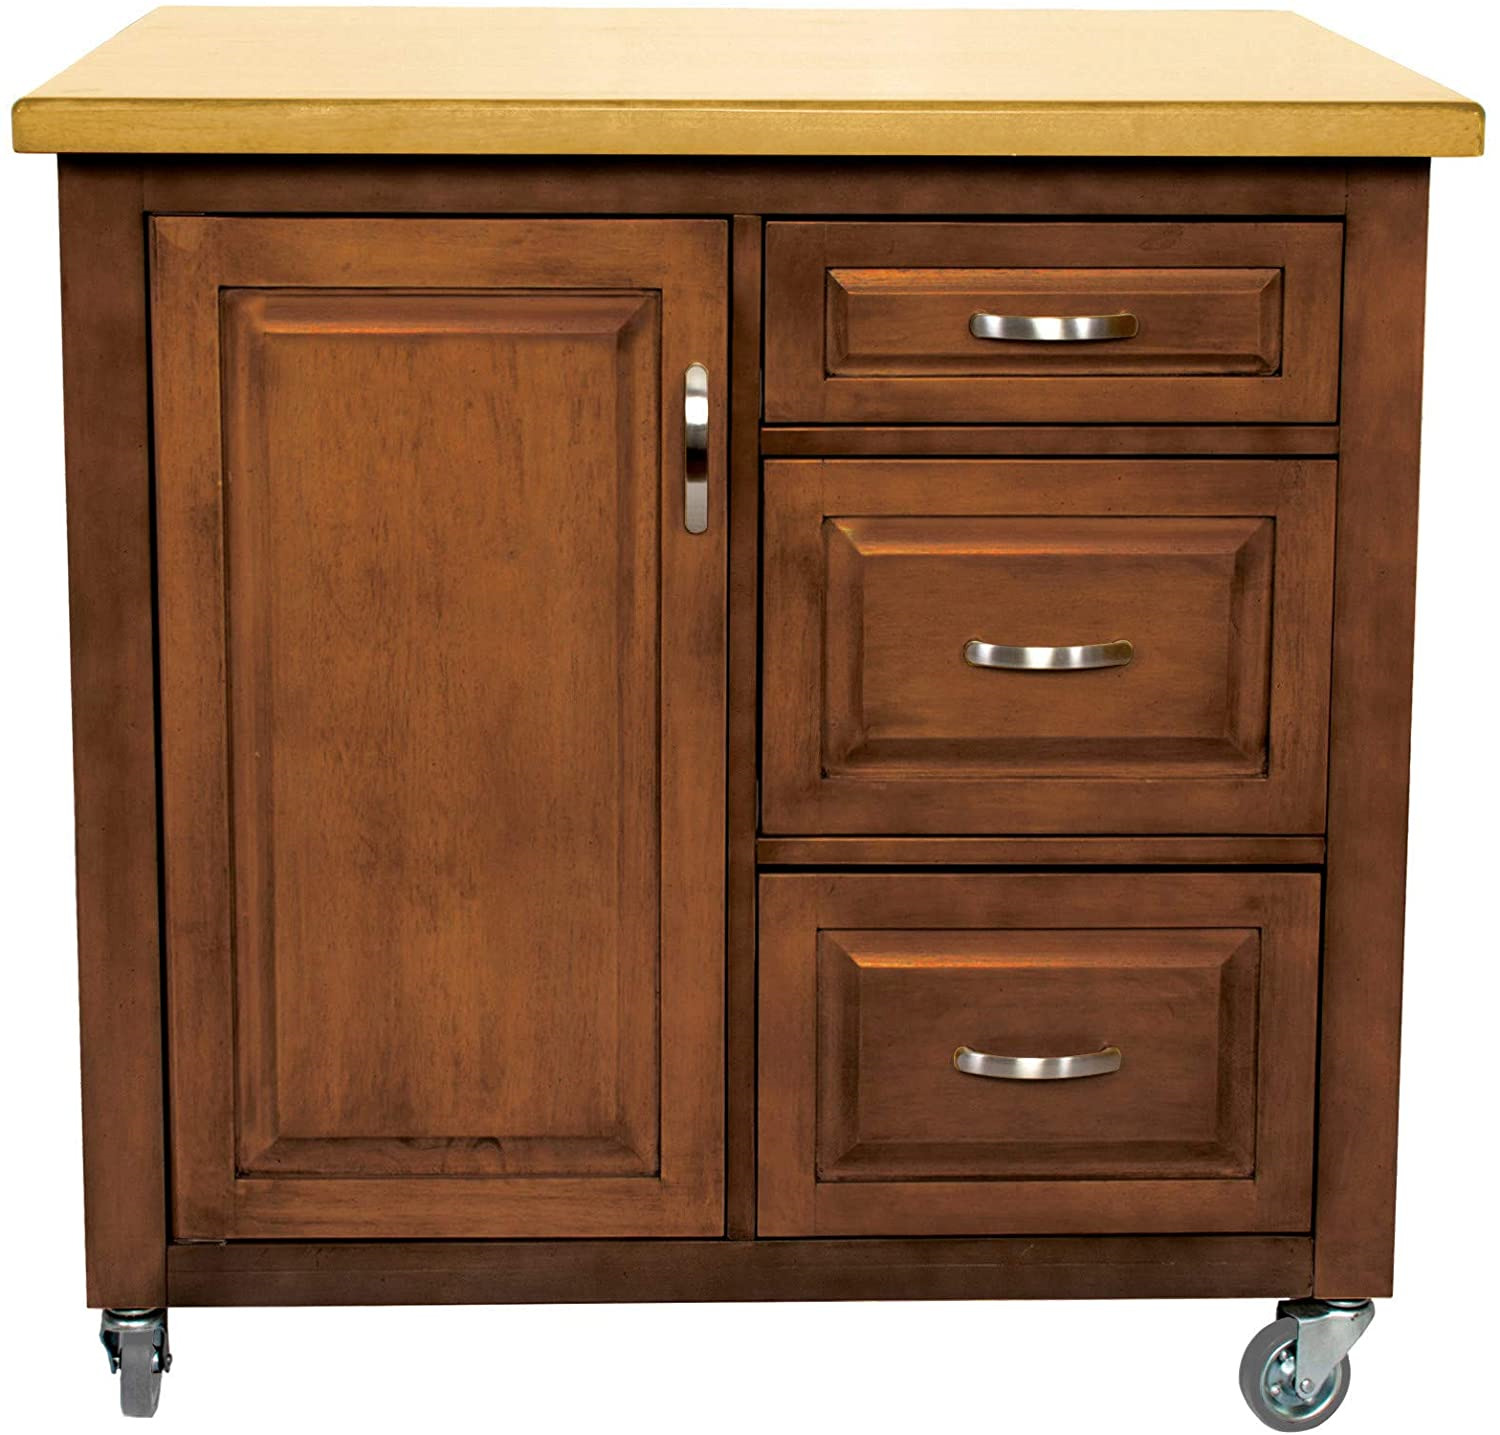 Sunset Trading Selections Kitchen Cart, 3 Drawers | Storage Cabinet, Distressed